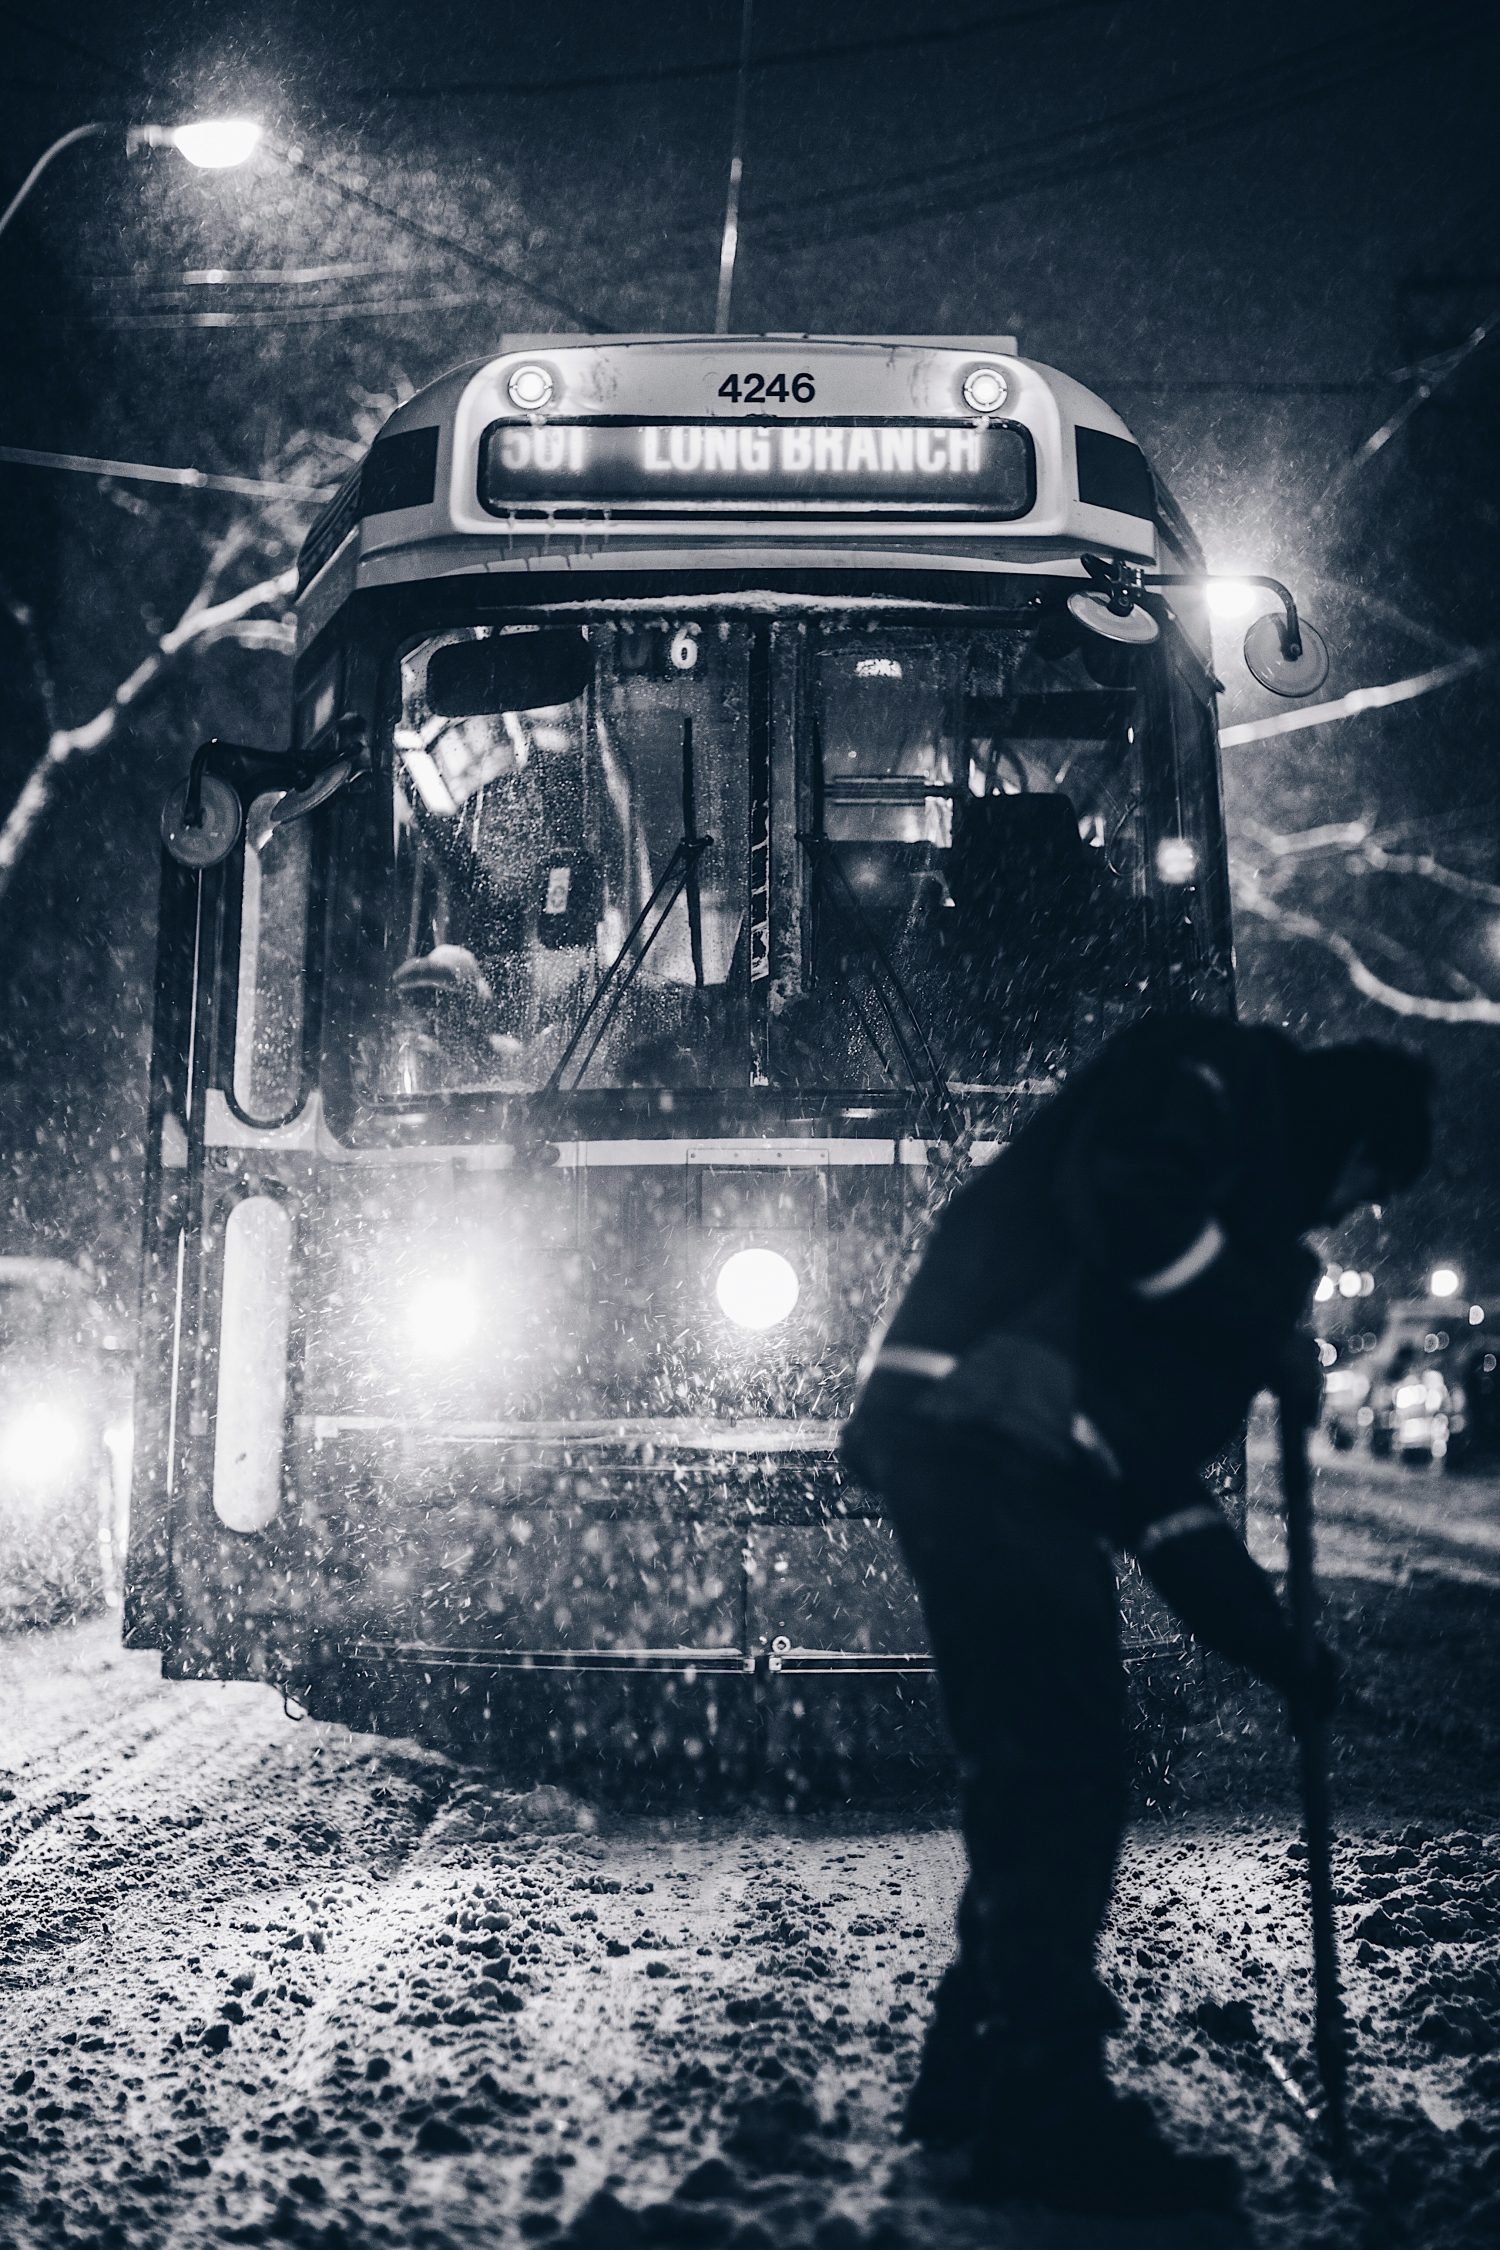 Driving Bus stuck in the snow- Scott Walsh photo - Unsplash. Driving to the mountains. Winter tyres, snow chains